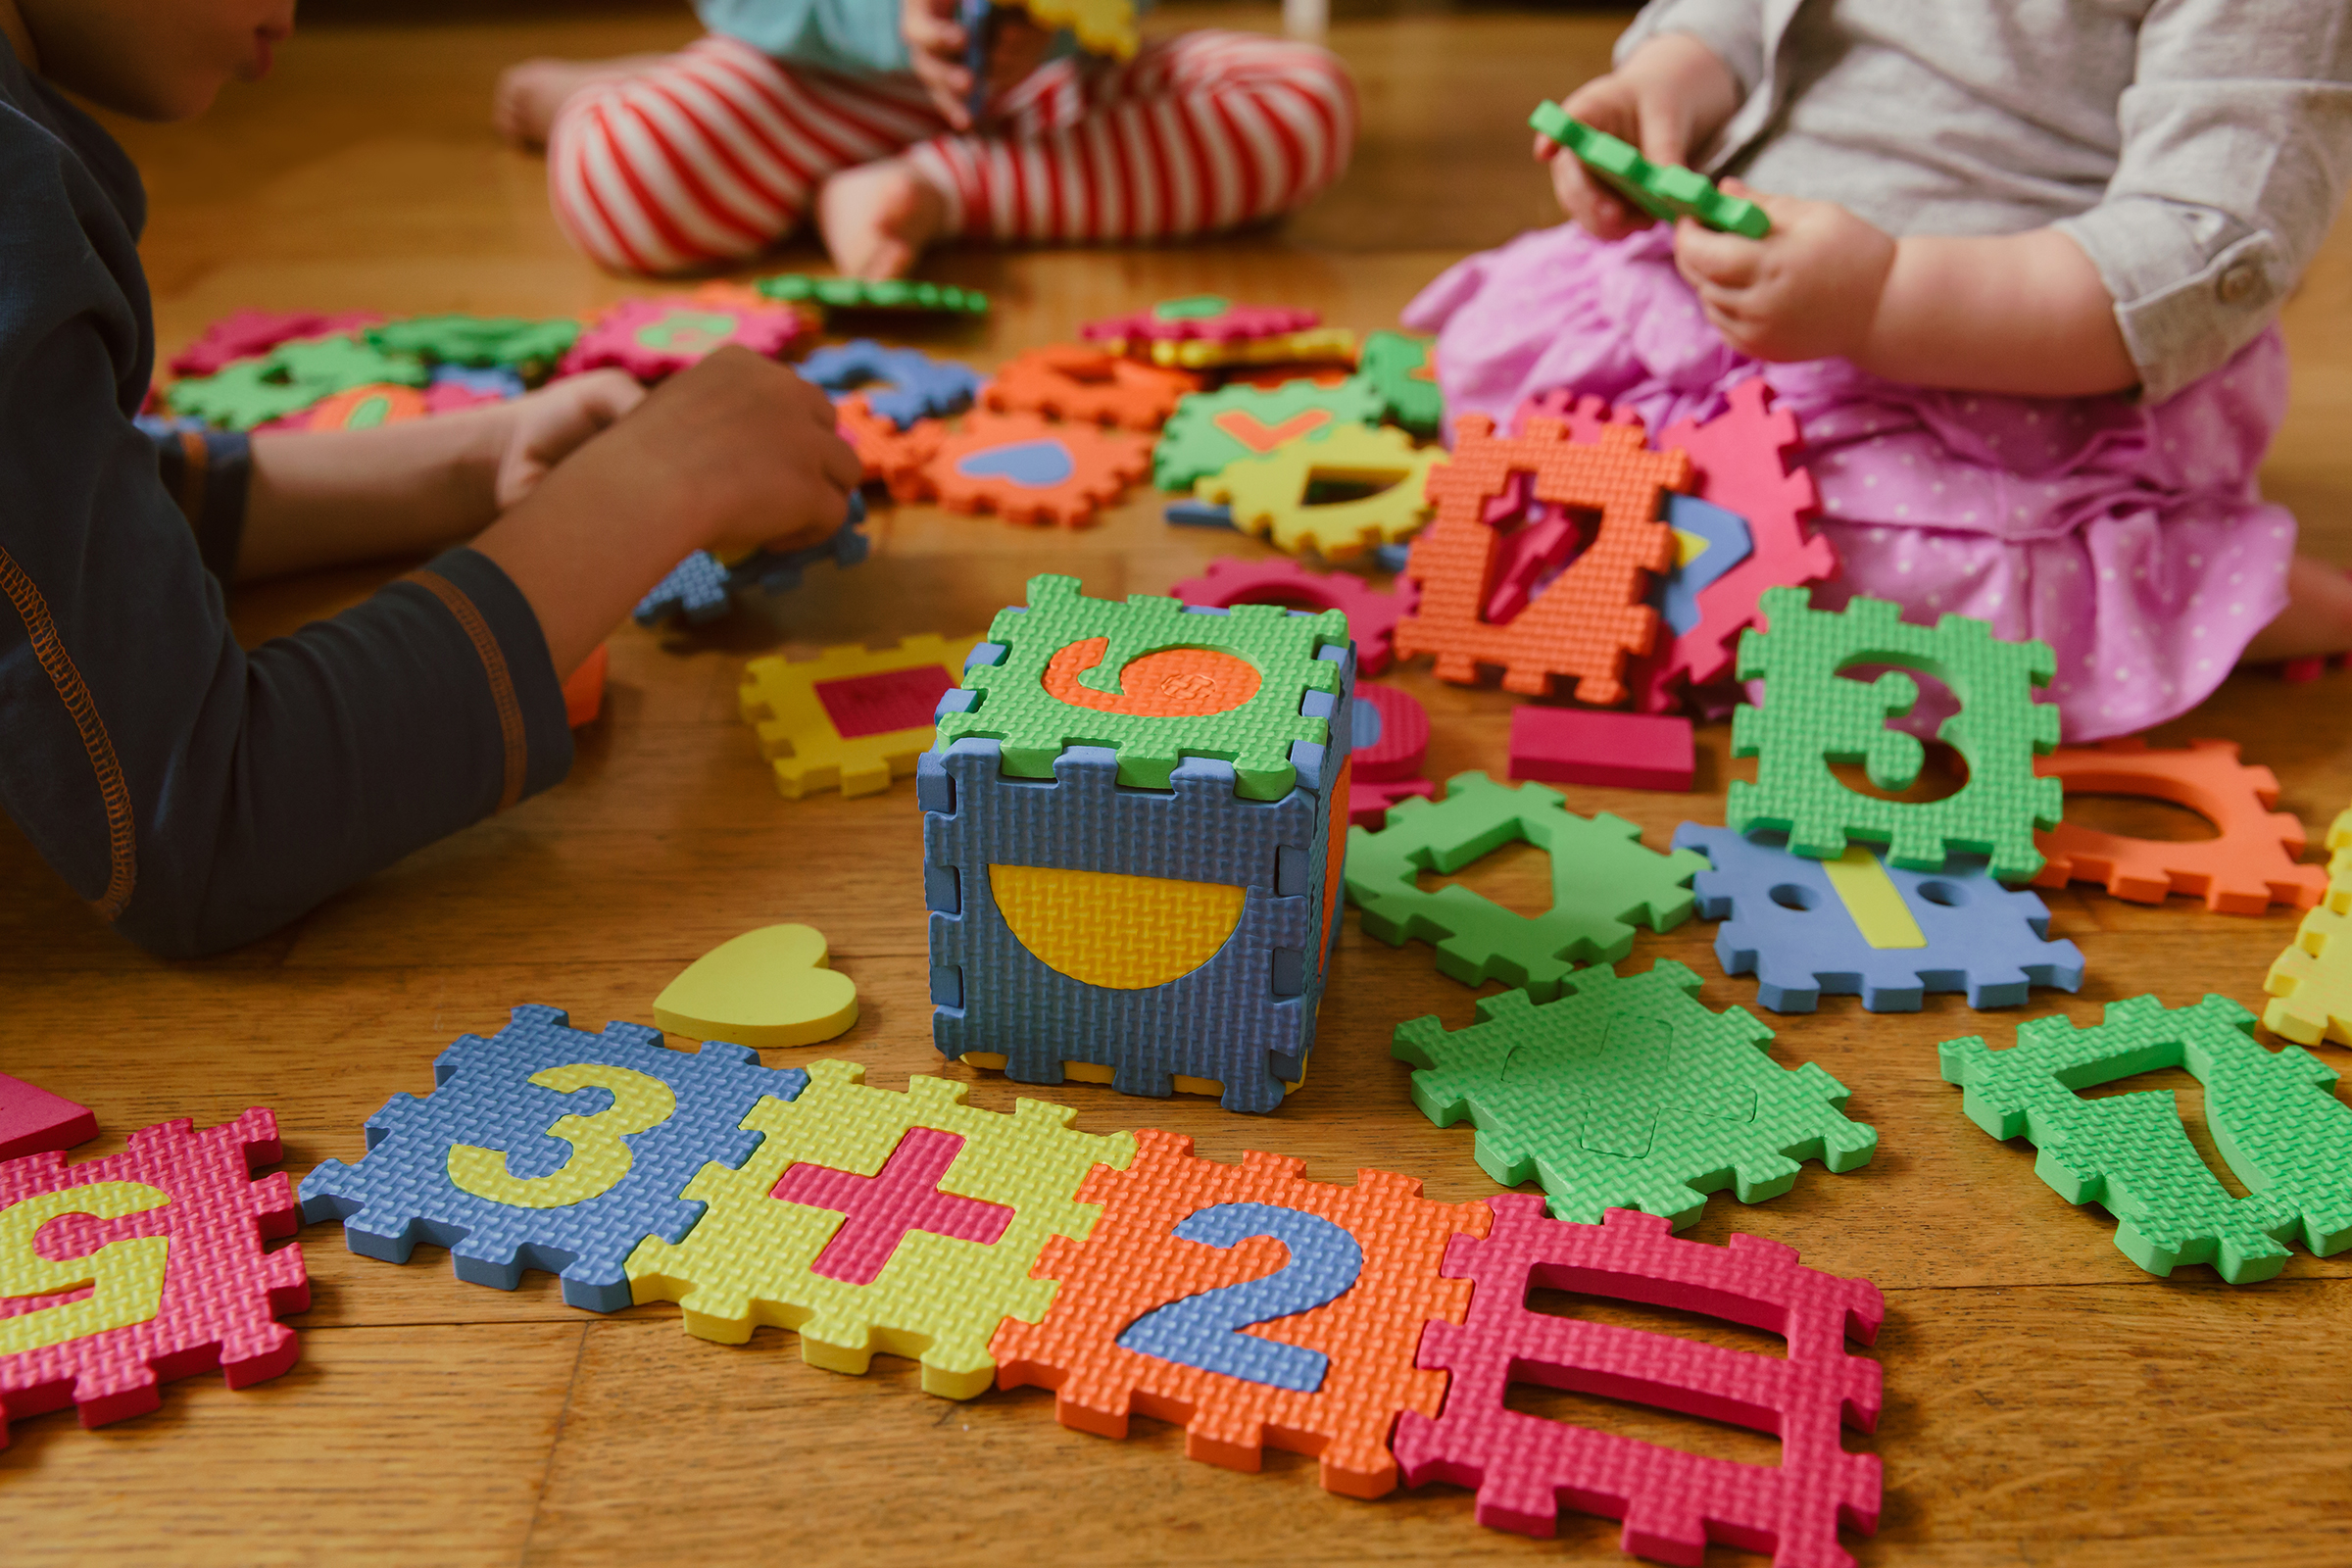 Kids playing with a puzzle. (Getty Images/iStockphoto)